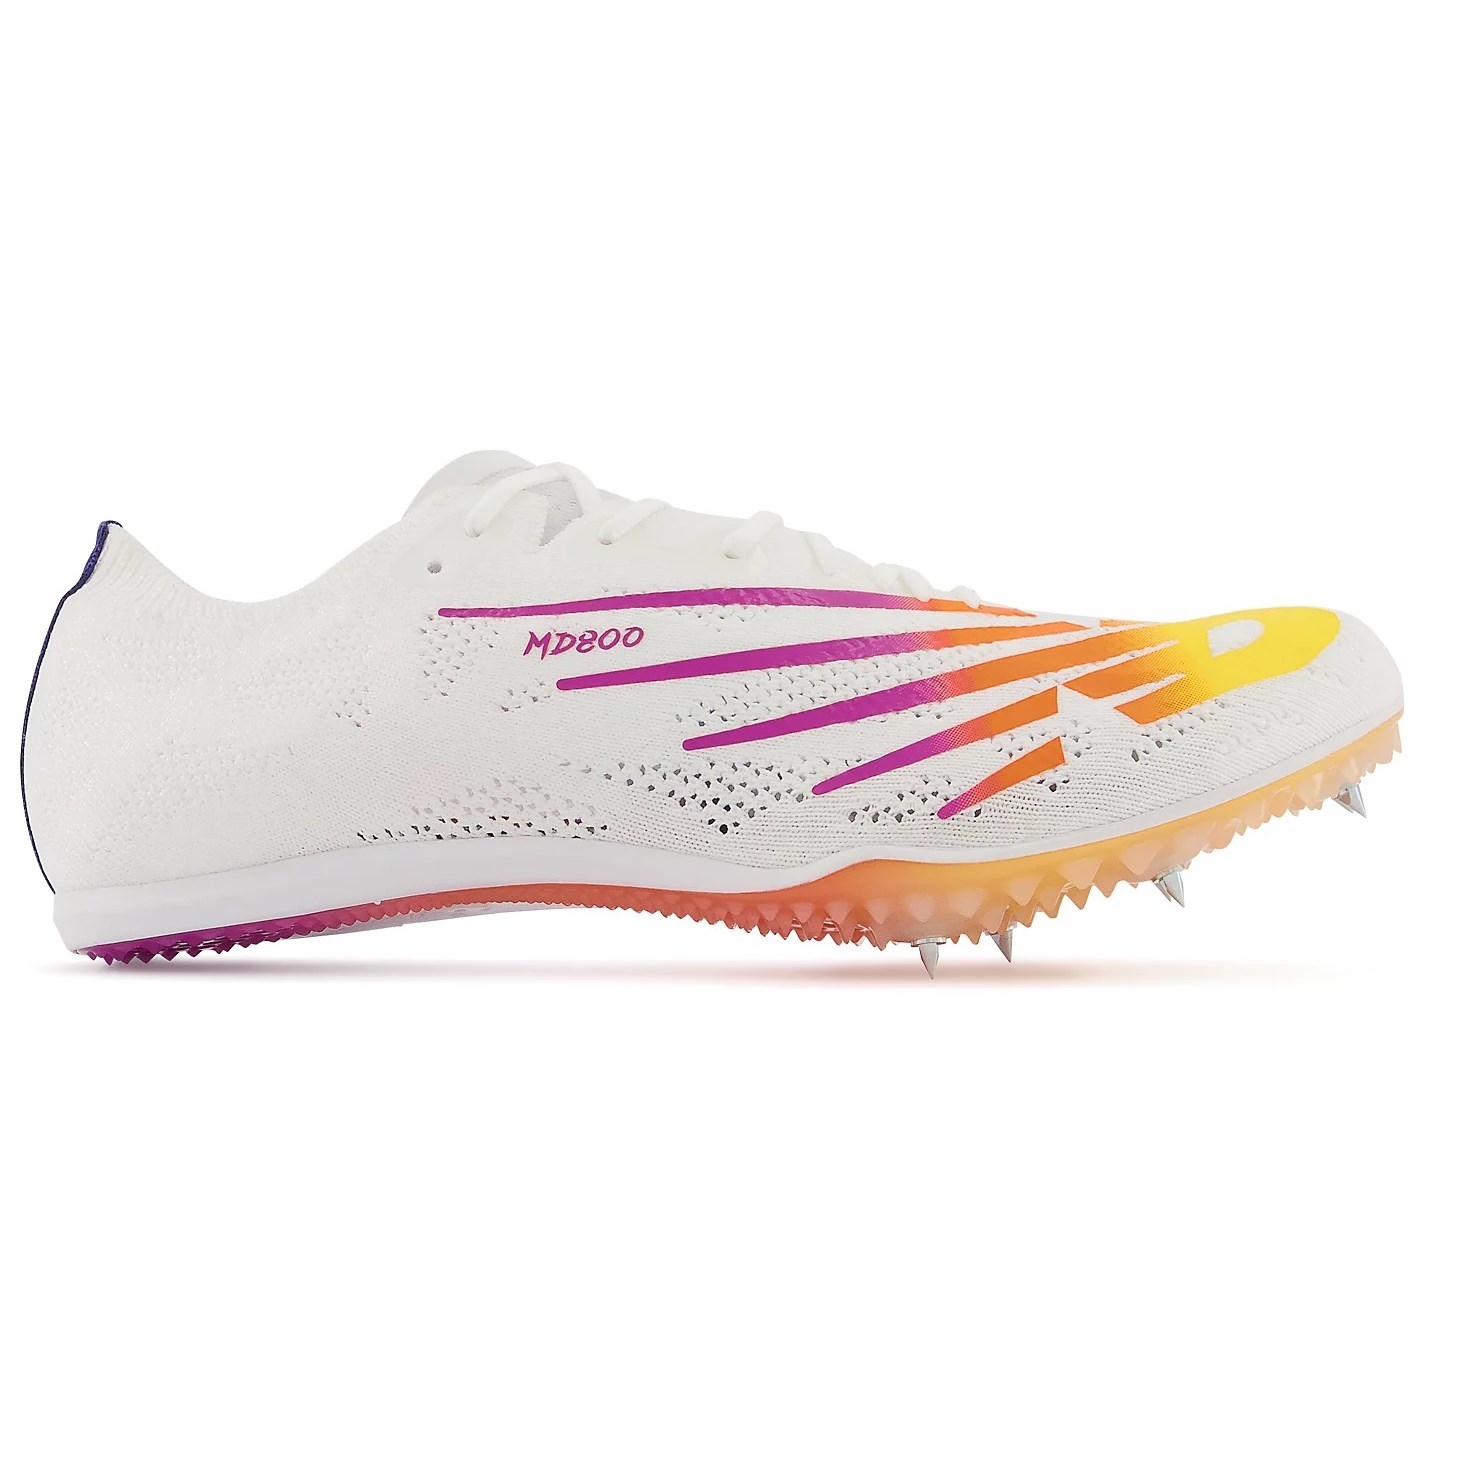 New Balance MD 800v8 - Mens Middle Distance Track Spikes - White ...